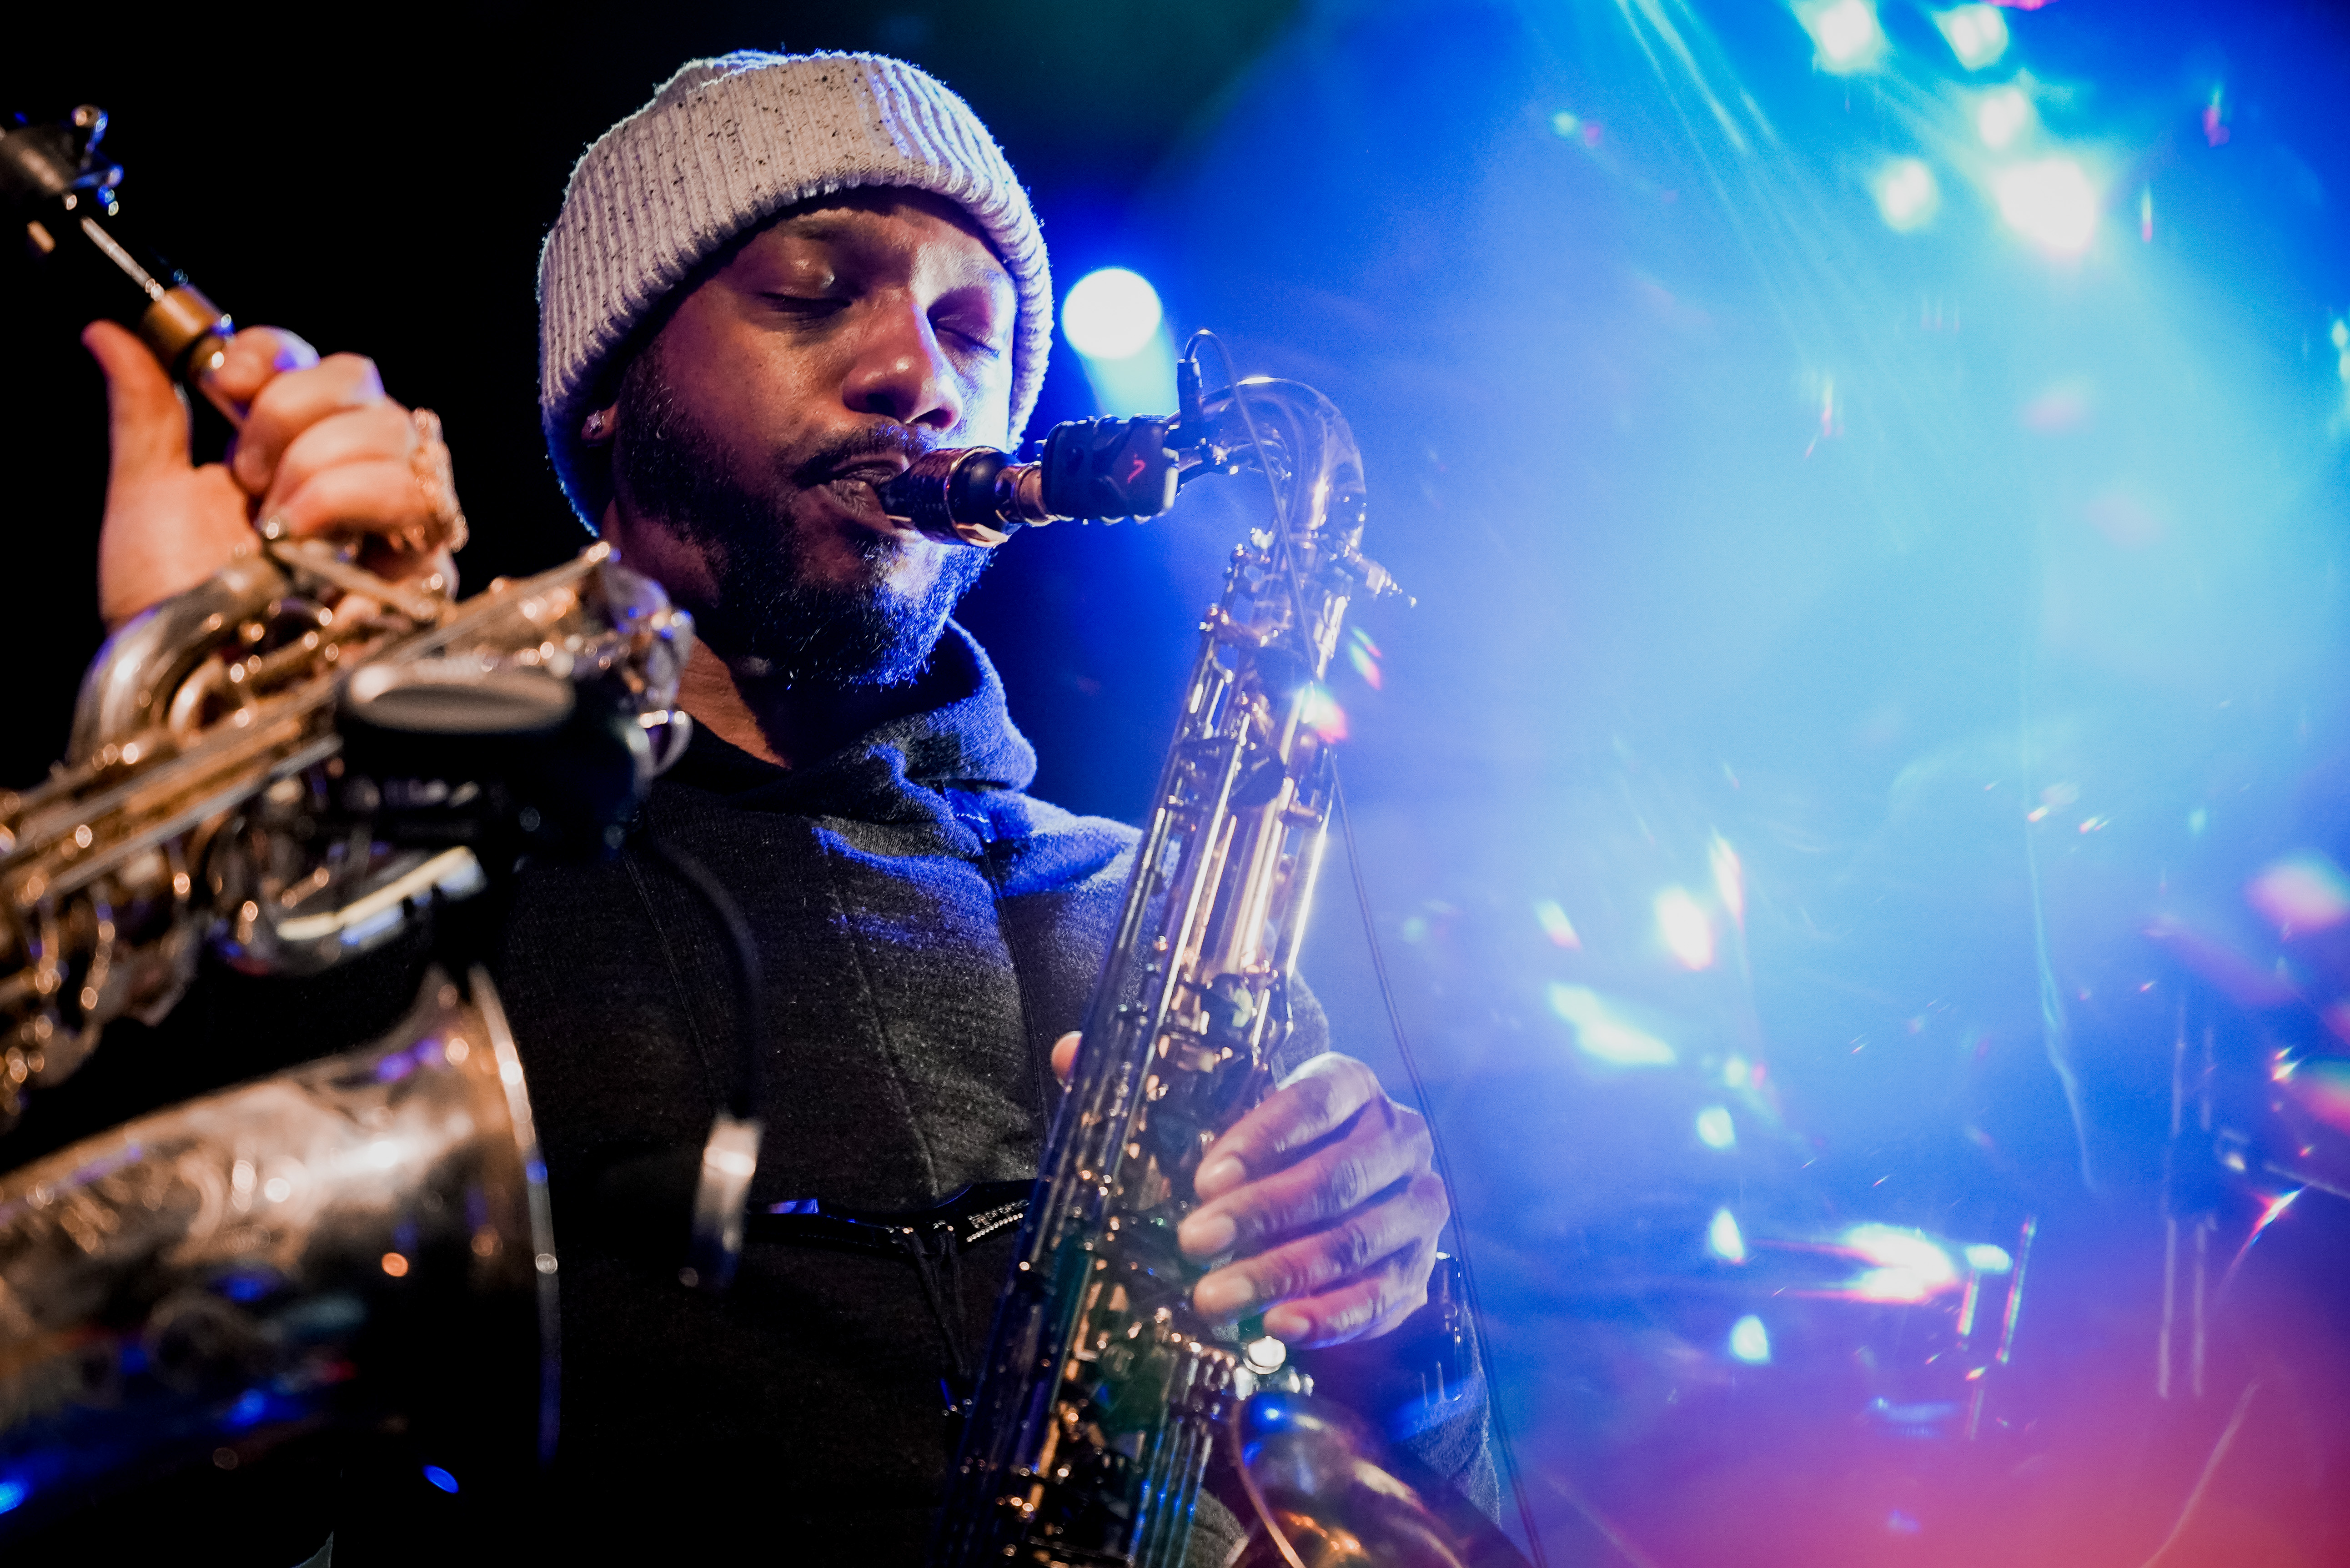 A saxophonist on stage